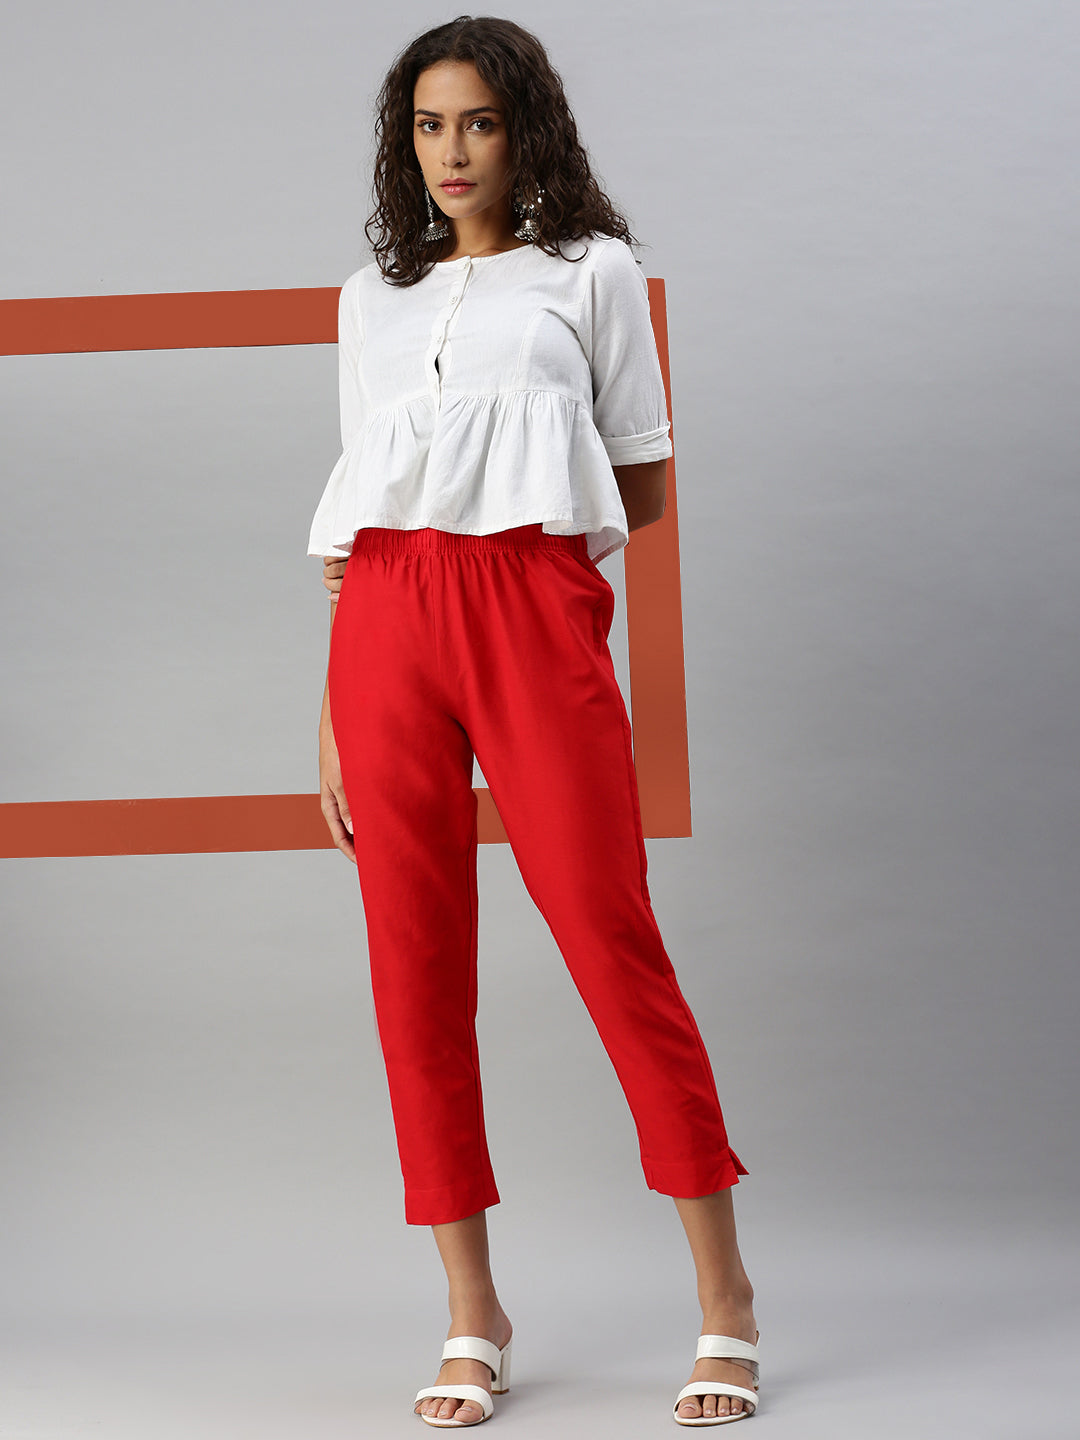 Buy Vero Moda Women Red Flared High Rise Trousers - Trousers for Women  19817002 | Myntra